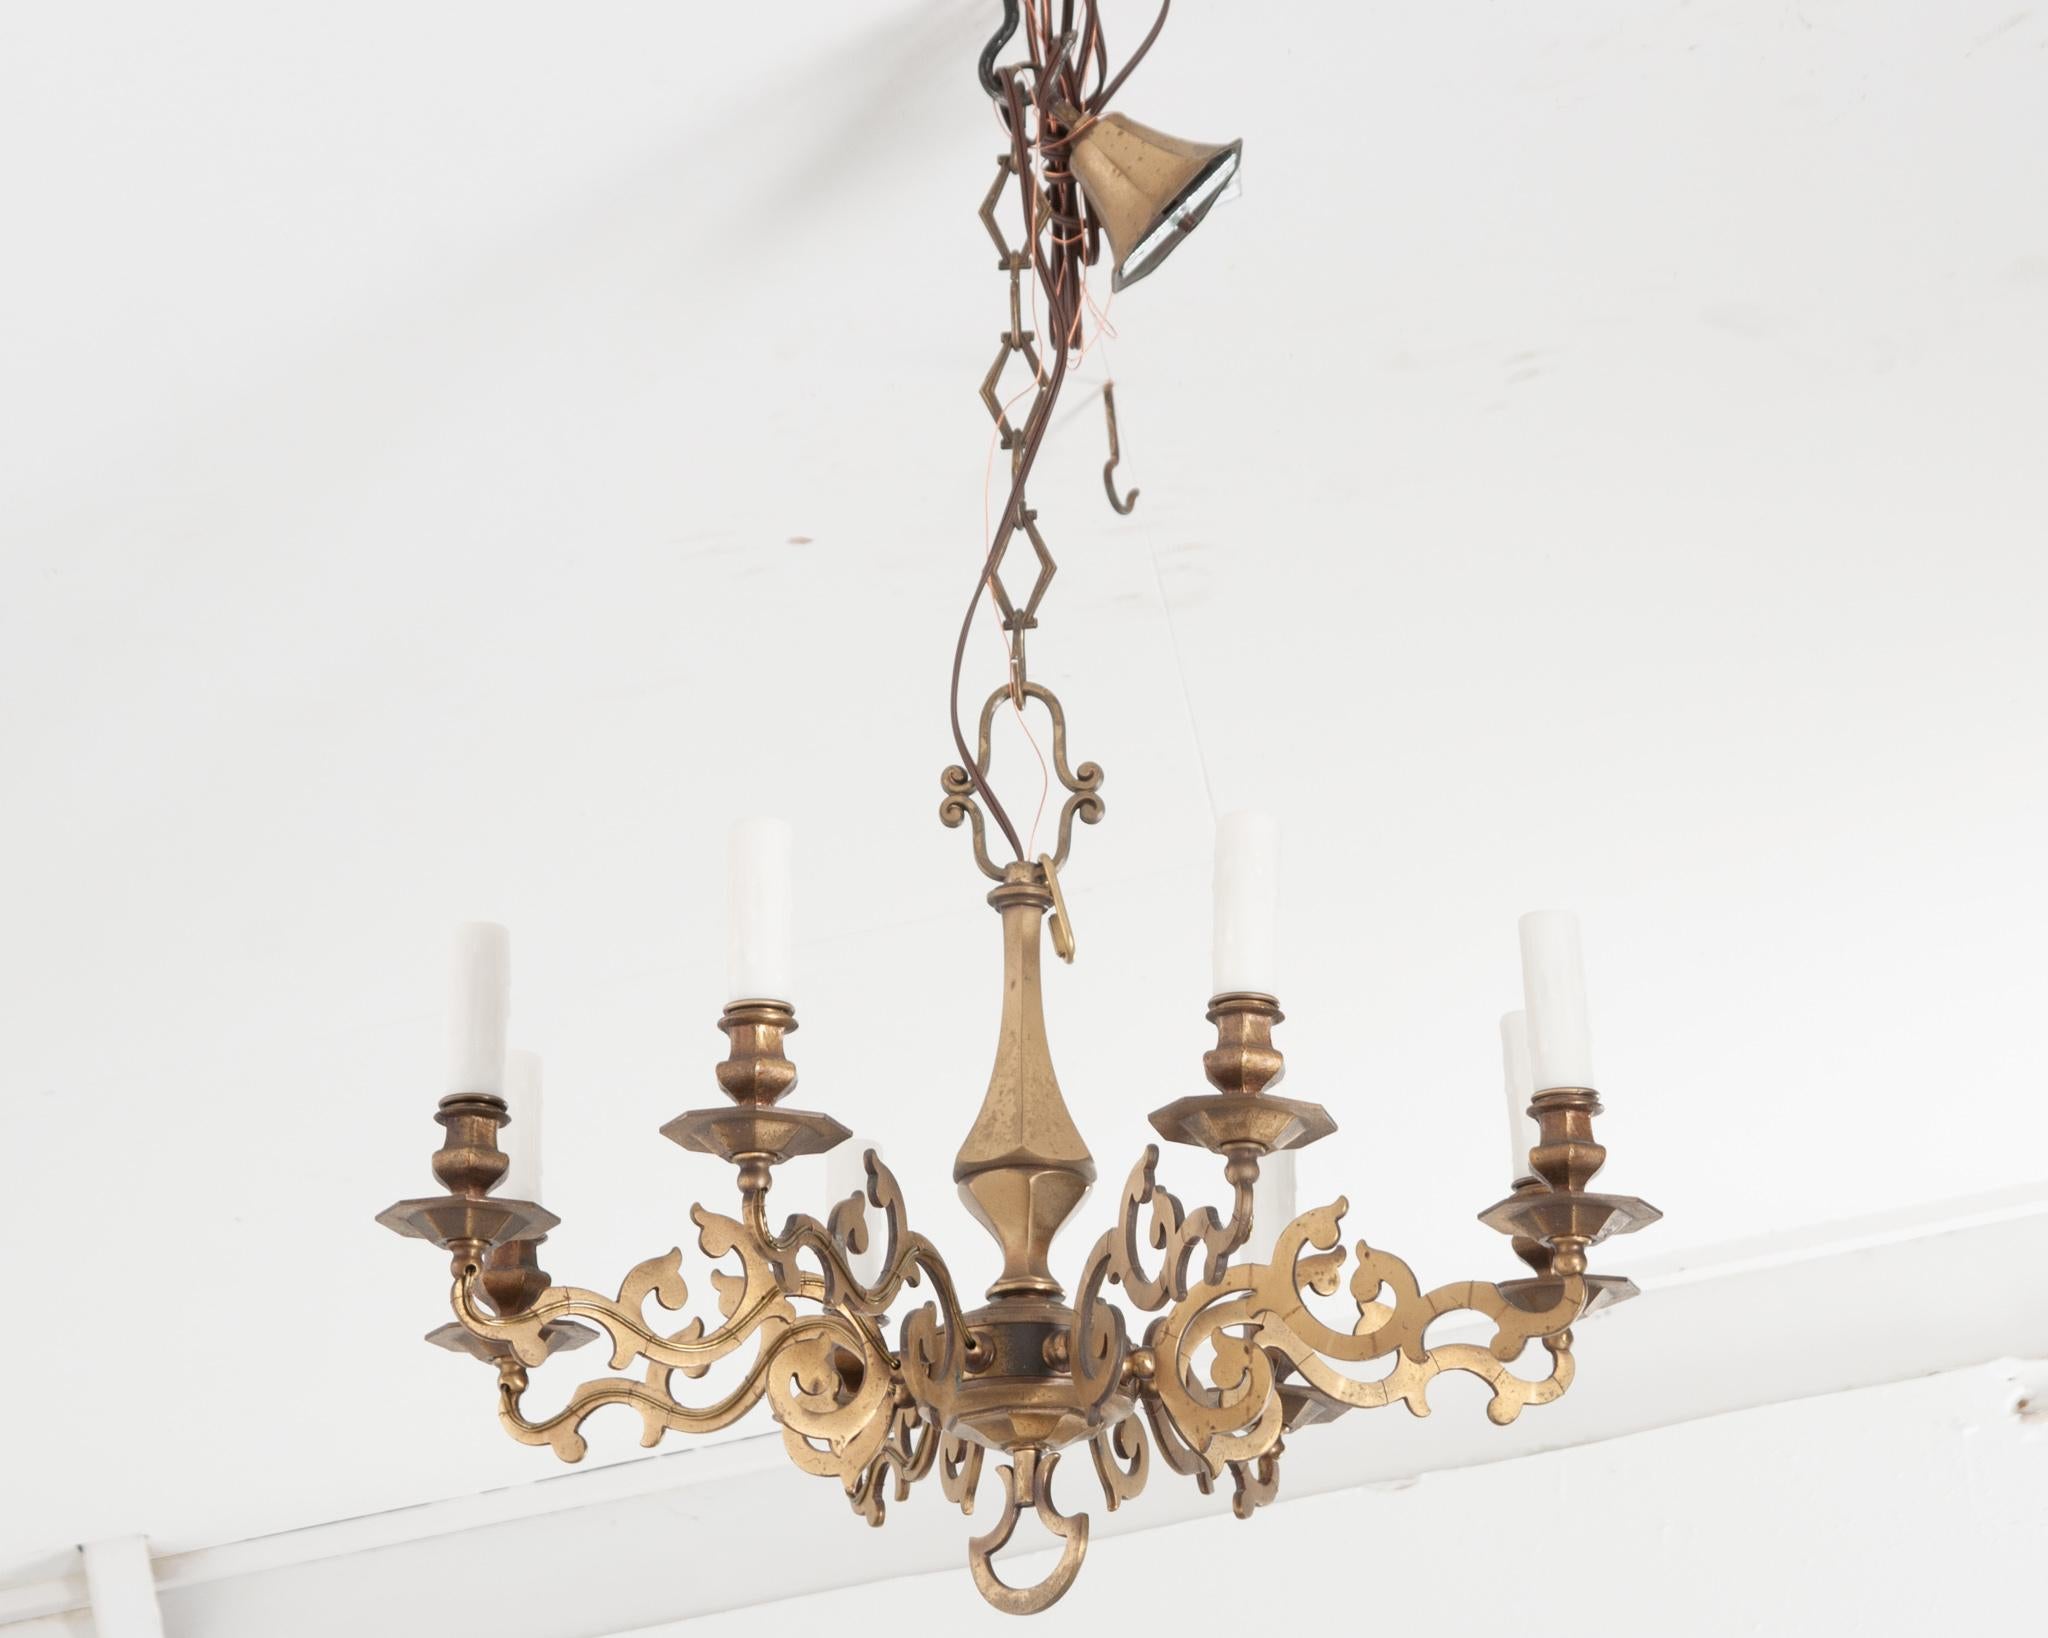 An elegant brass chandelier from 19th century France to elevate any space. Eight scrolling arms and unique shaped chain links emphasize the artful craftsmanship of this fixture. Canopy measures 4”x4”. Chain is 13-½” in length. Cleaned and rewired